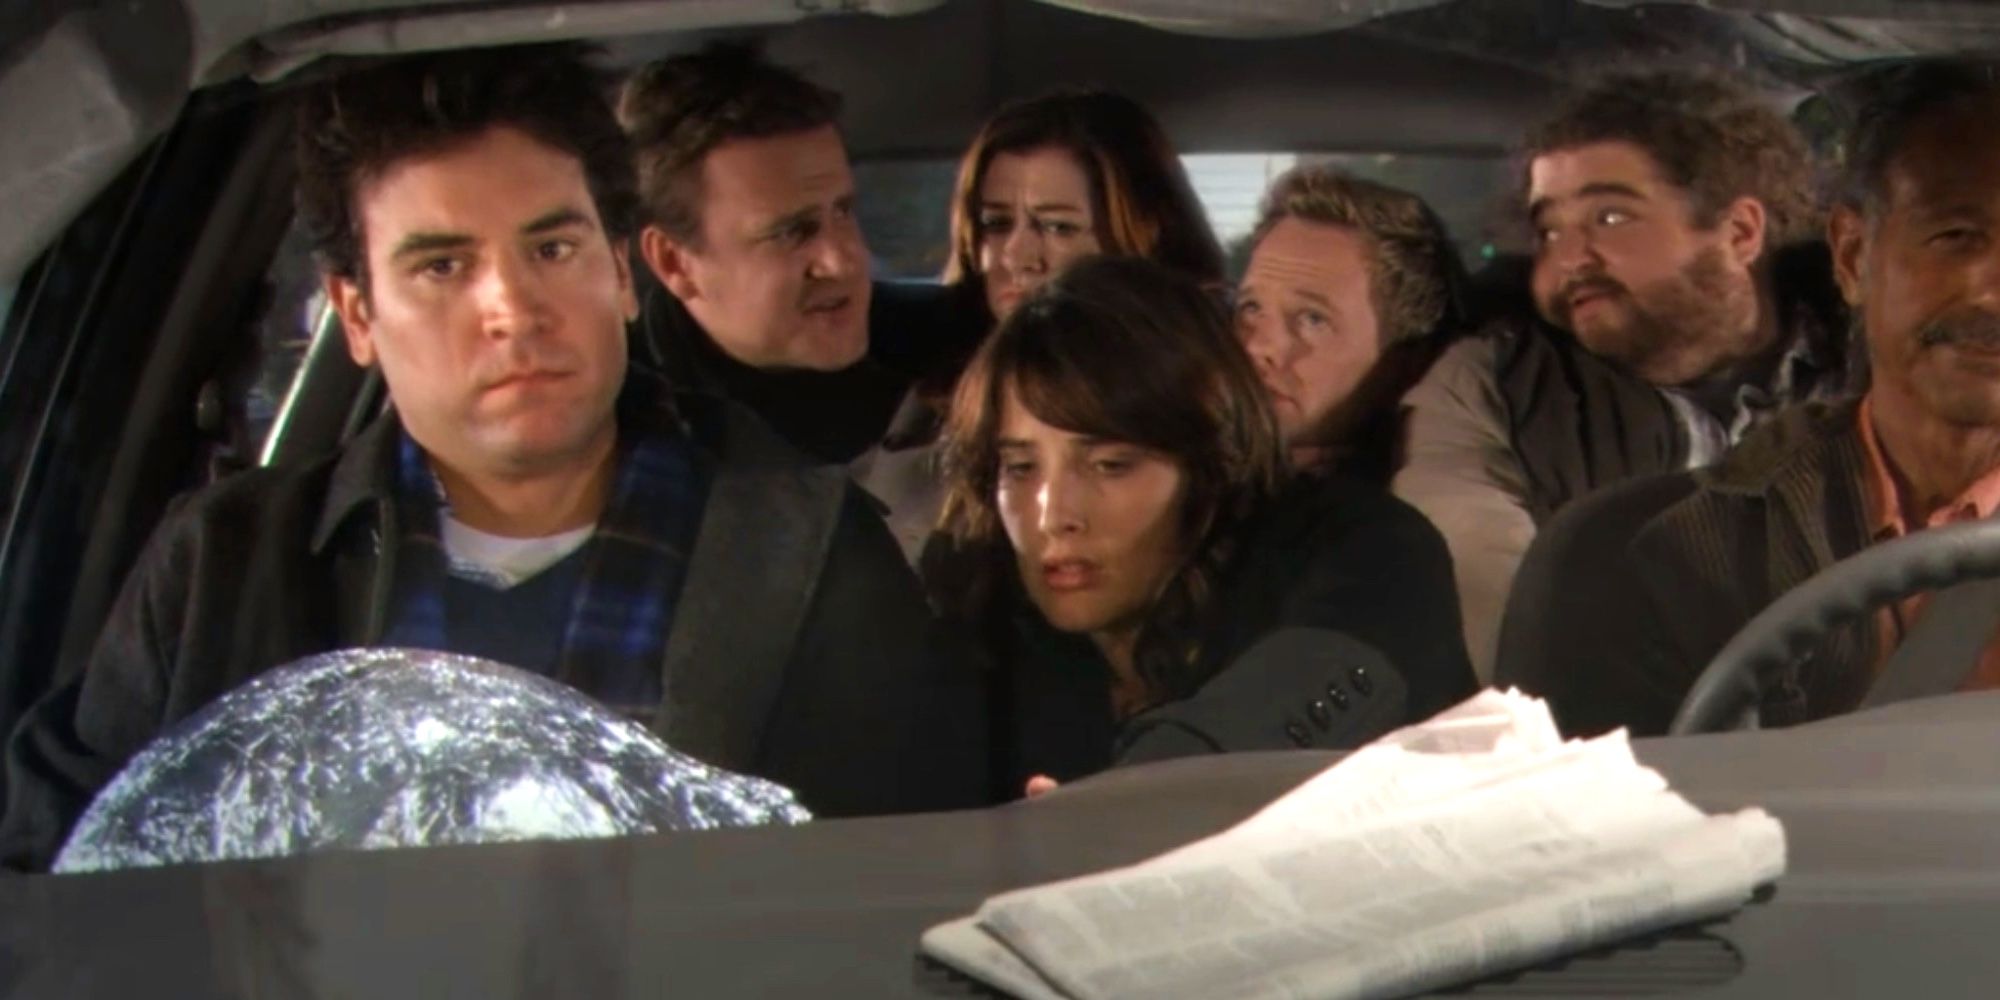 The main cast of How I Met Your mother squeezed into a cab with the driver and Jorge Garcia